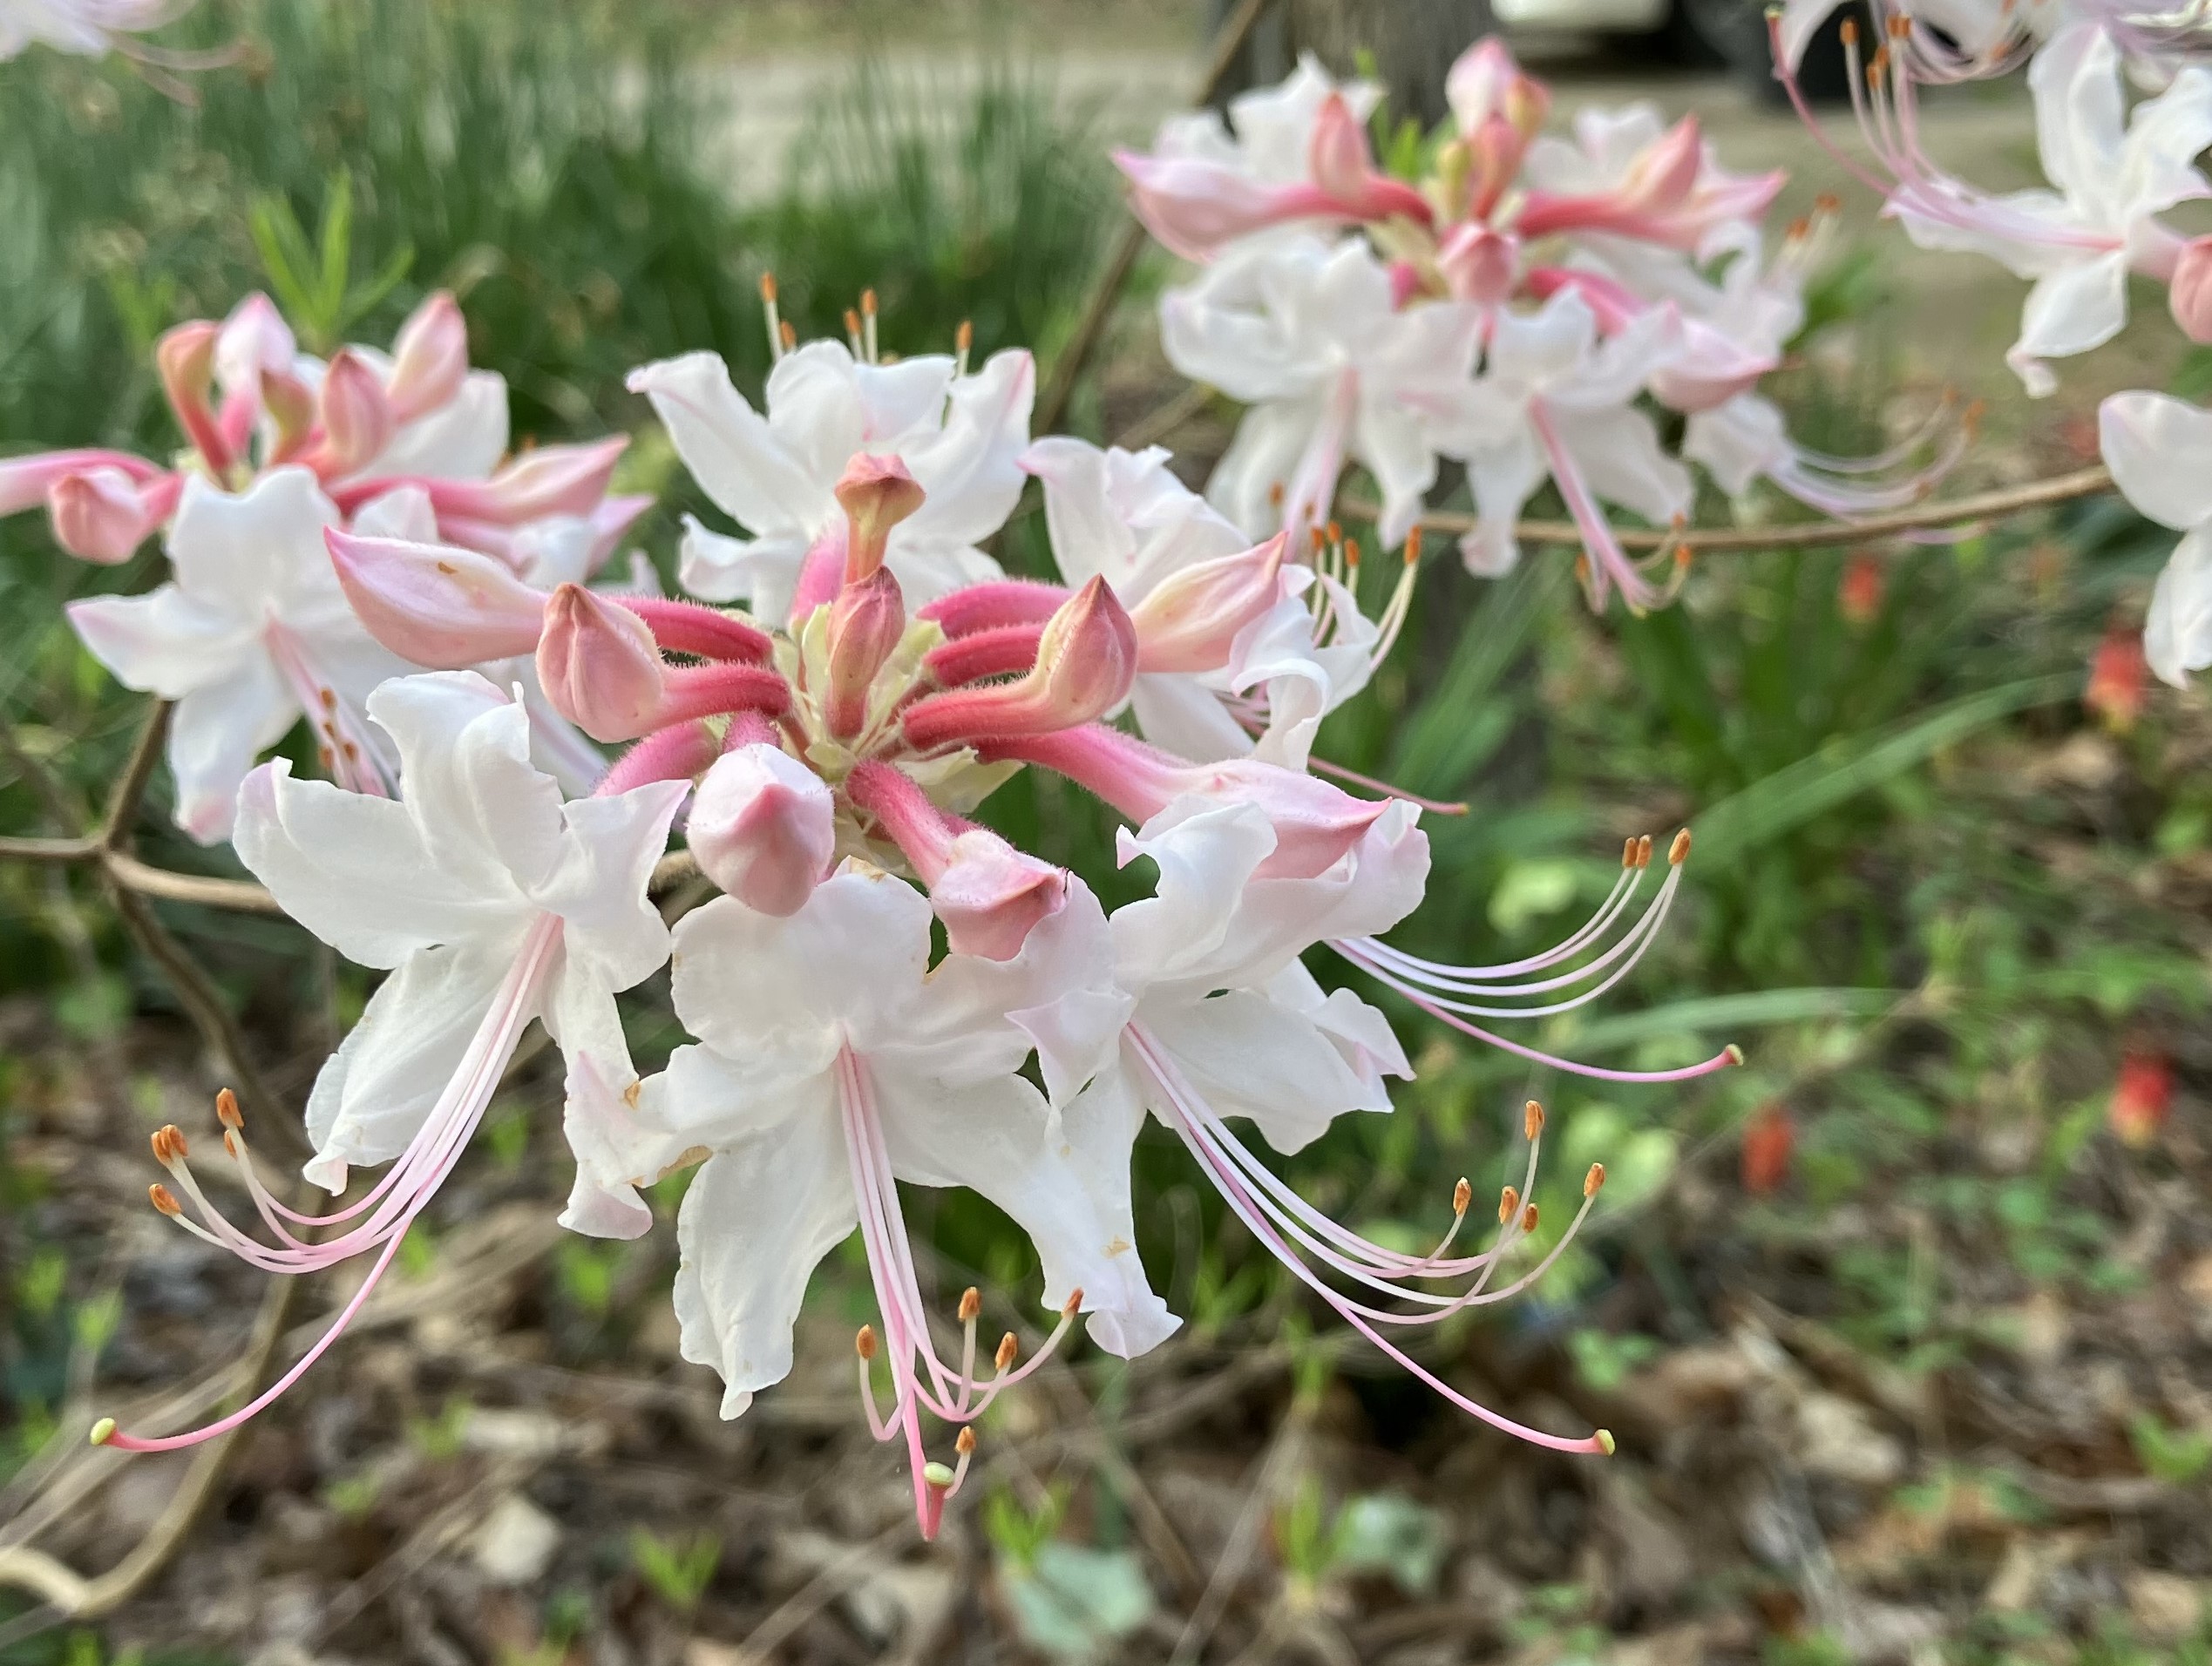 A deciduous azalea. The flowers have soft white petals and a pink tube.